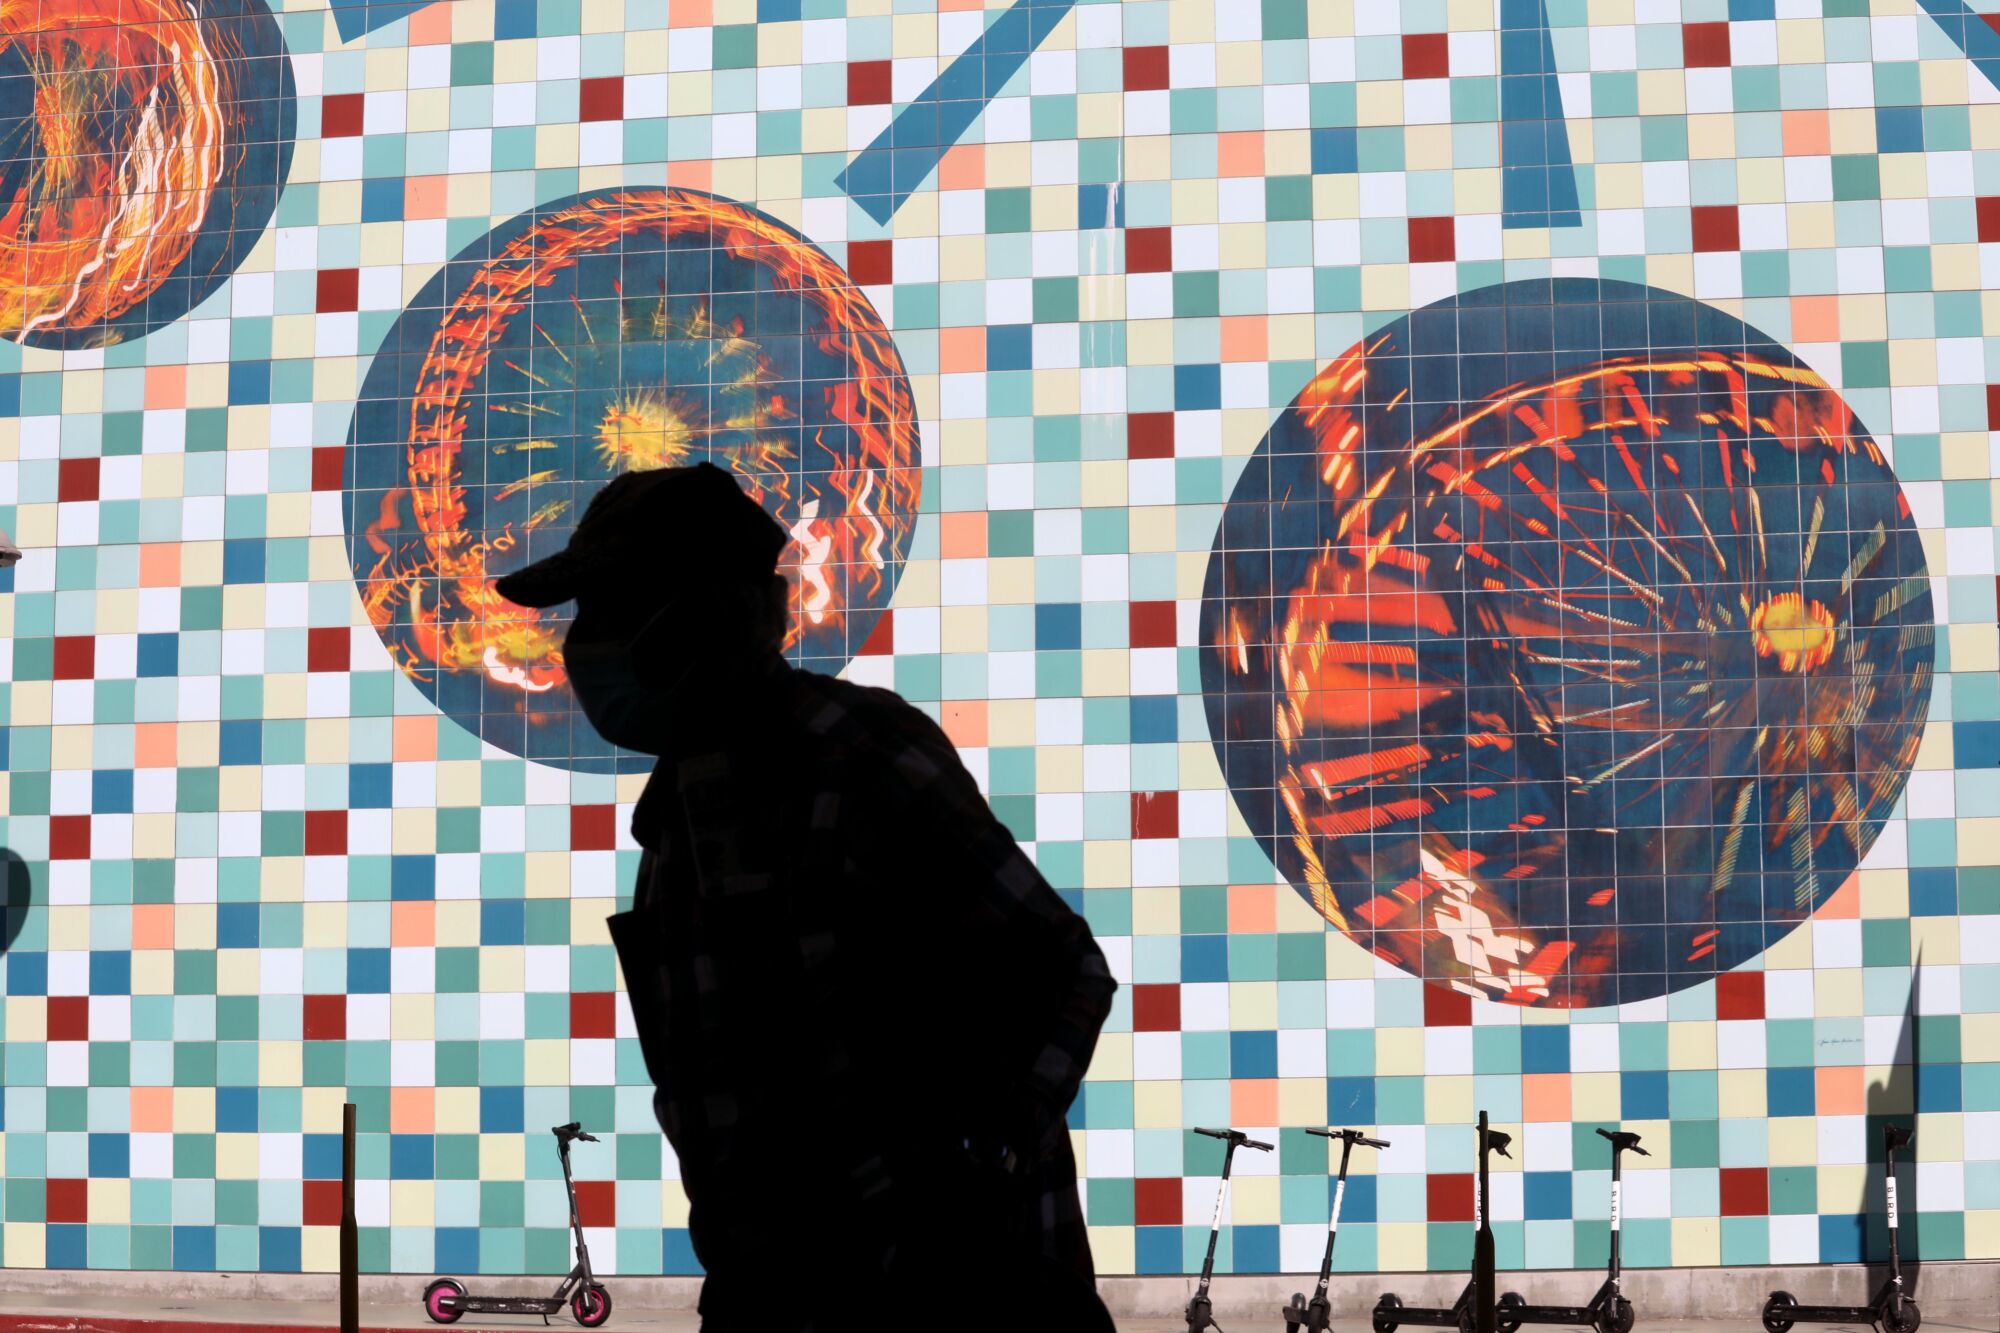 The silhouette of a person in front of a tile mosaic wall